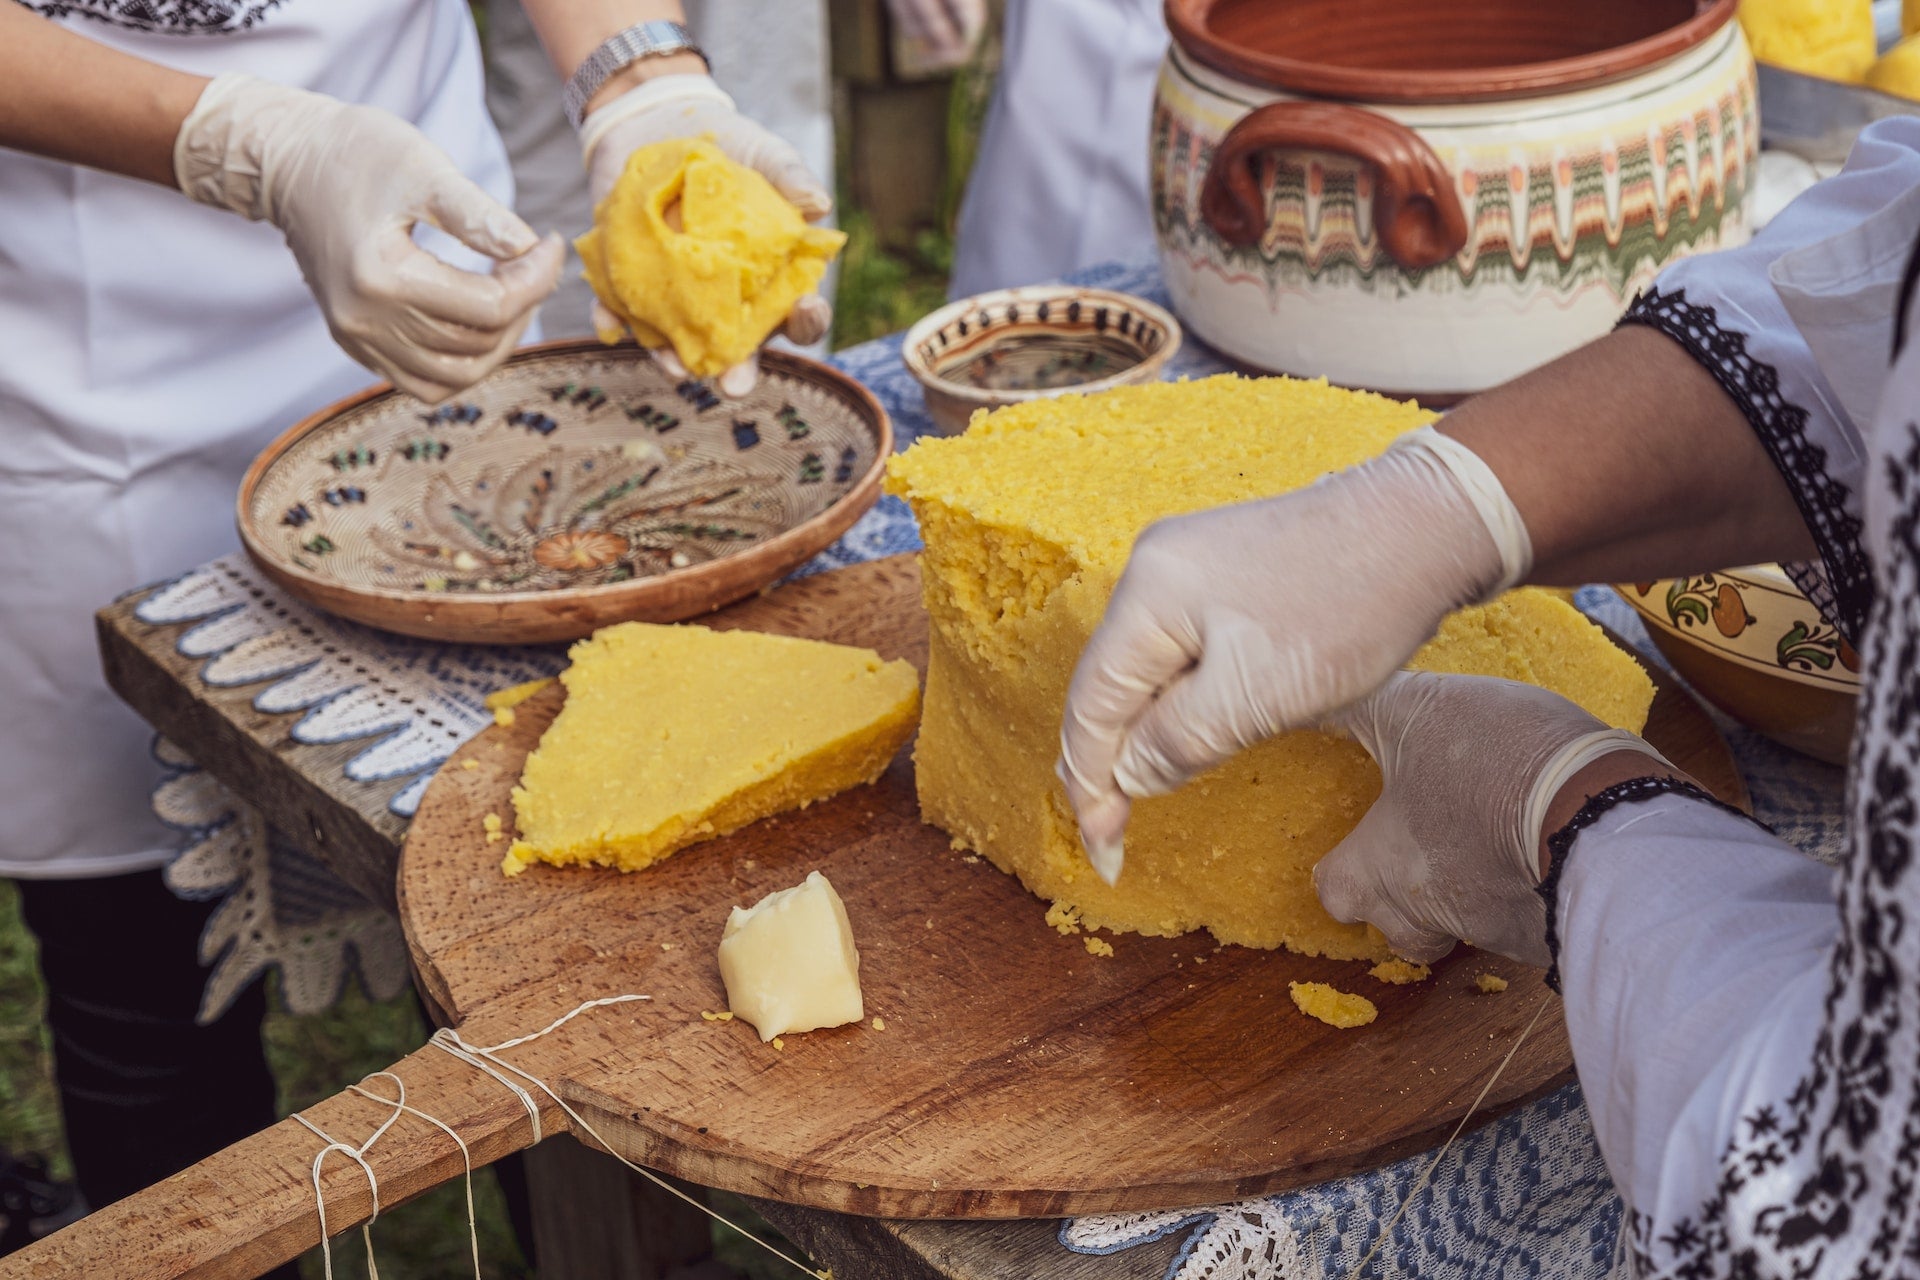 The Irresistible Italian Polenta: A Taste of Tradition and Comfort